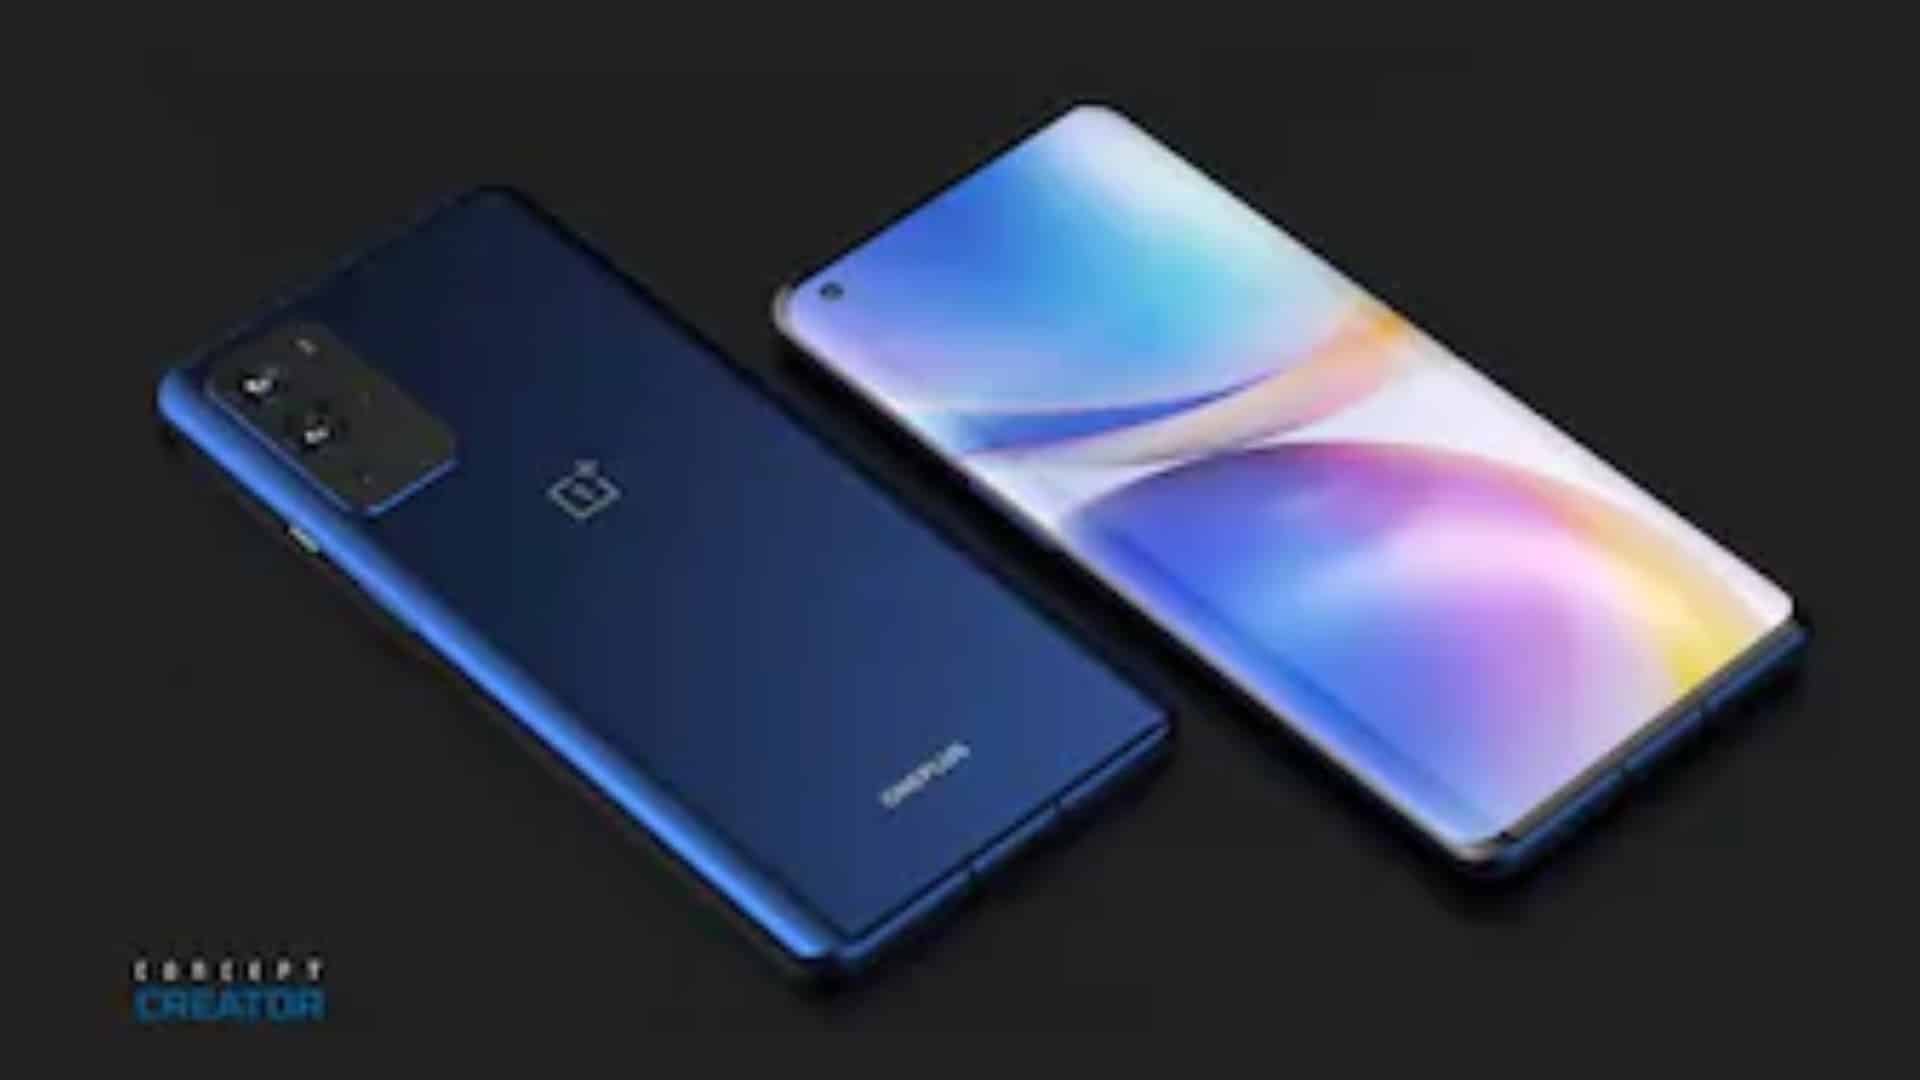 OnePlus 9, OnePlus 9 Pro Specs Leaked Ahead of Rumoured March Launch